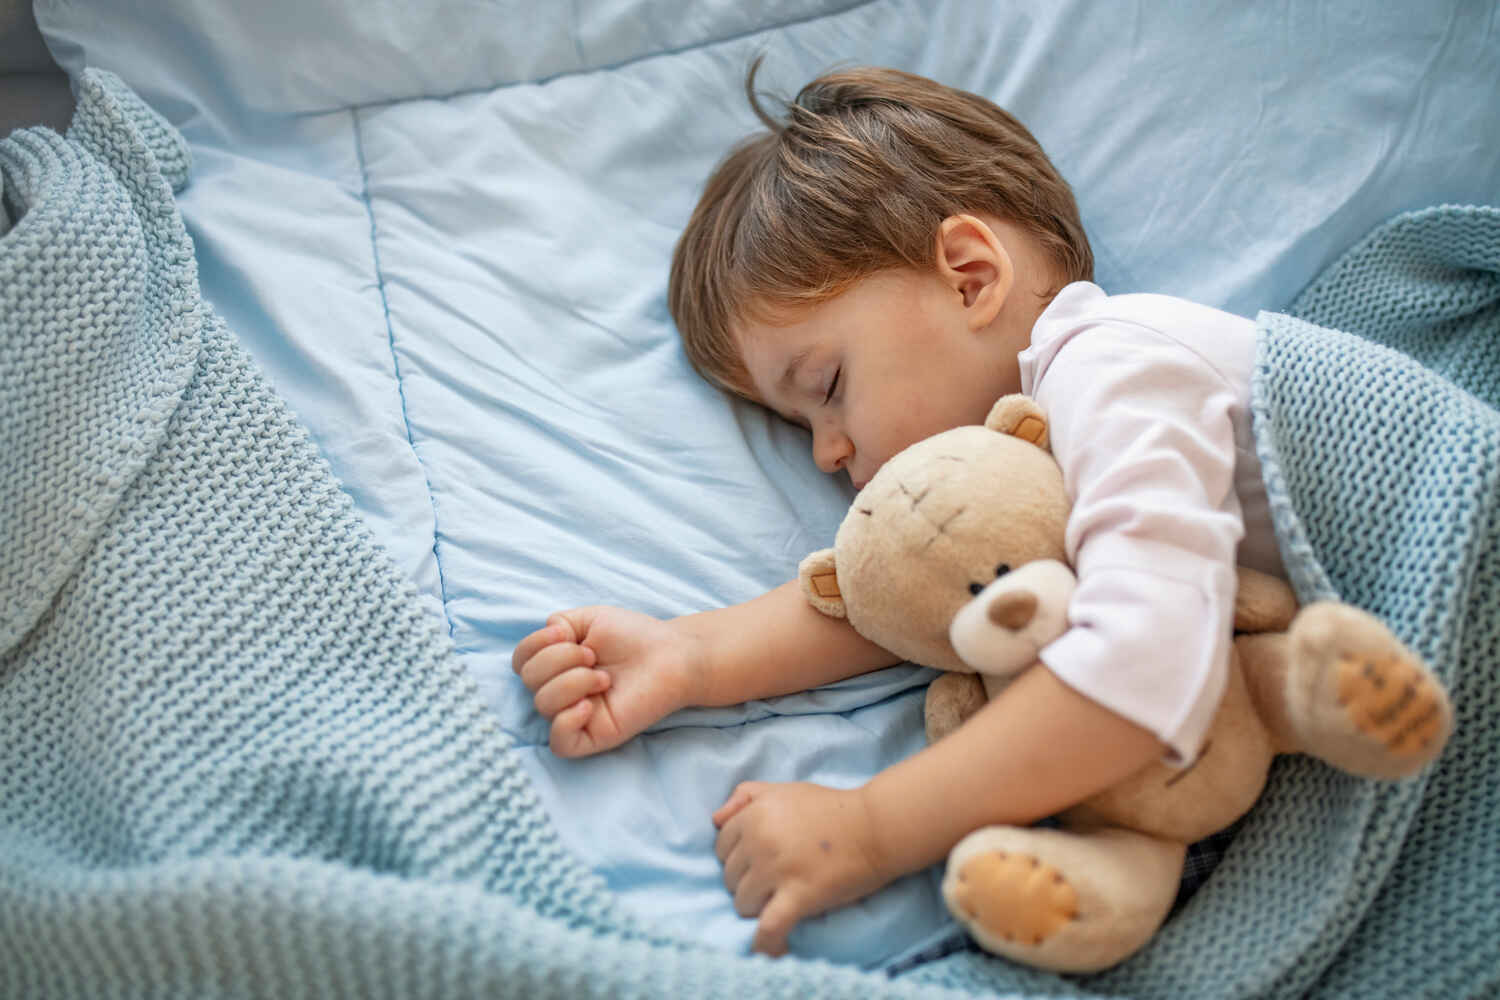 Sleep is very important for building immunity in toddlers